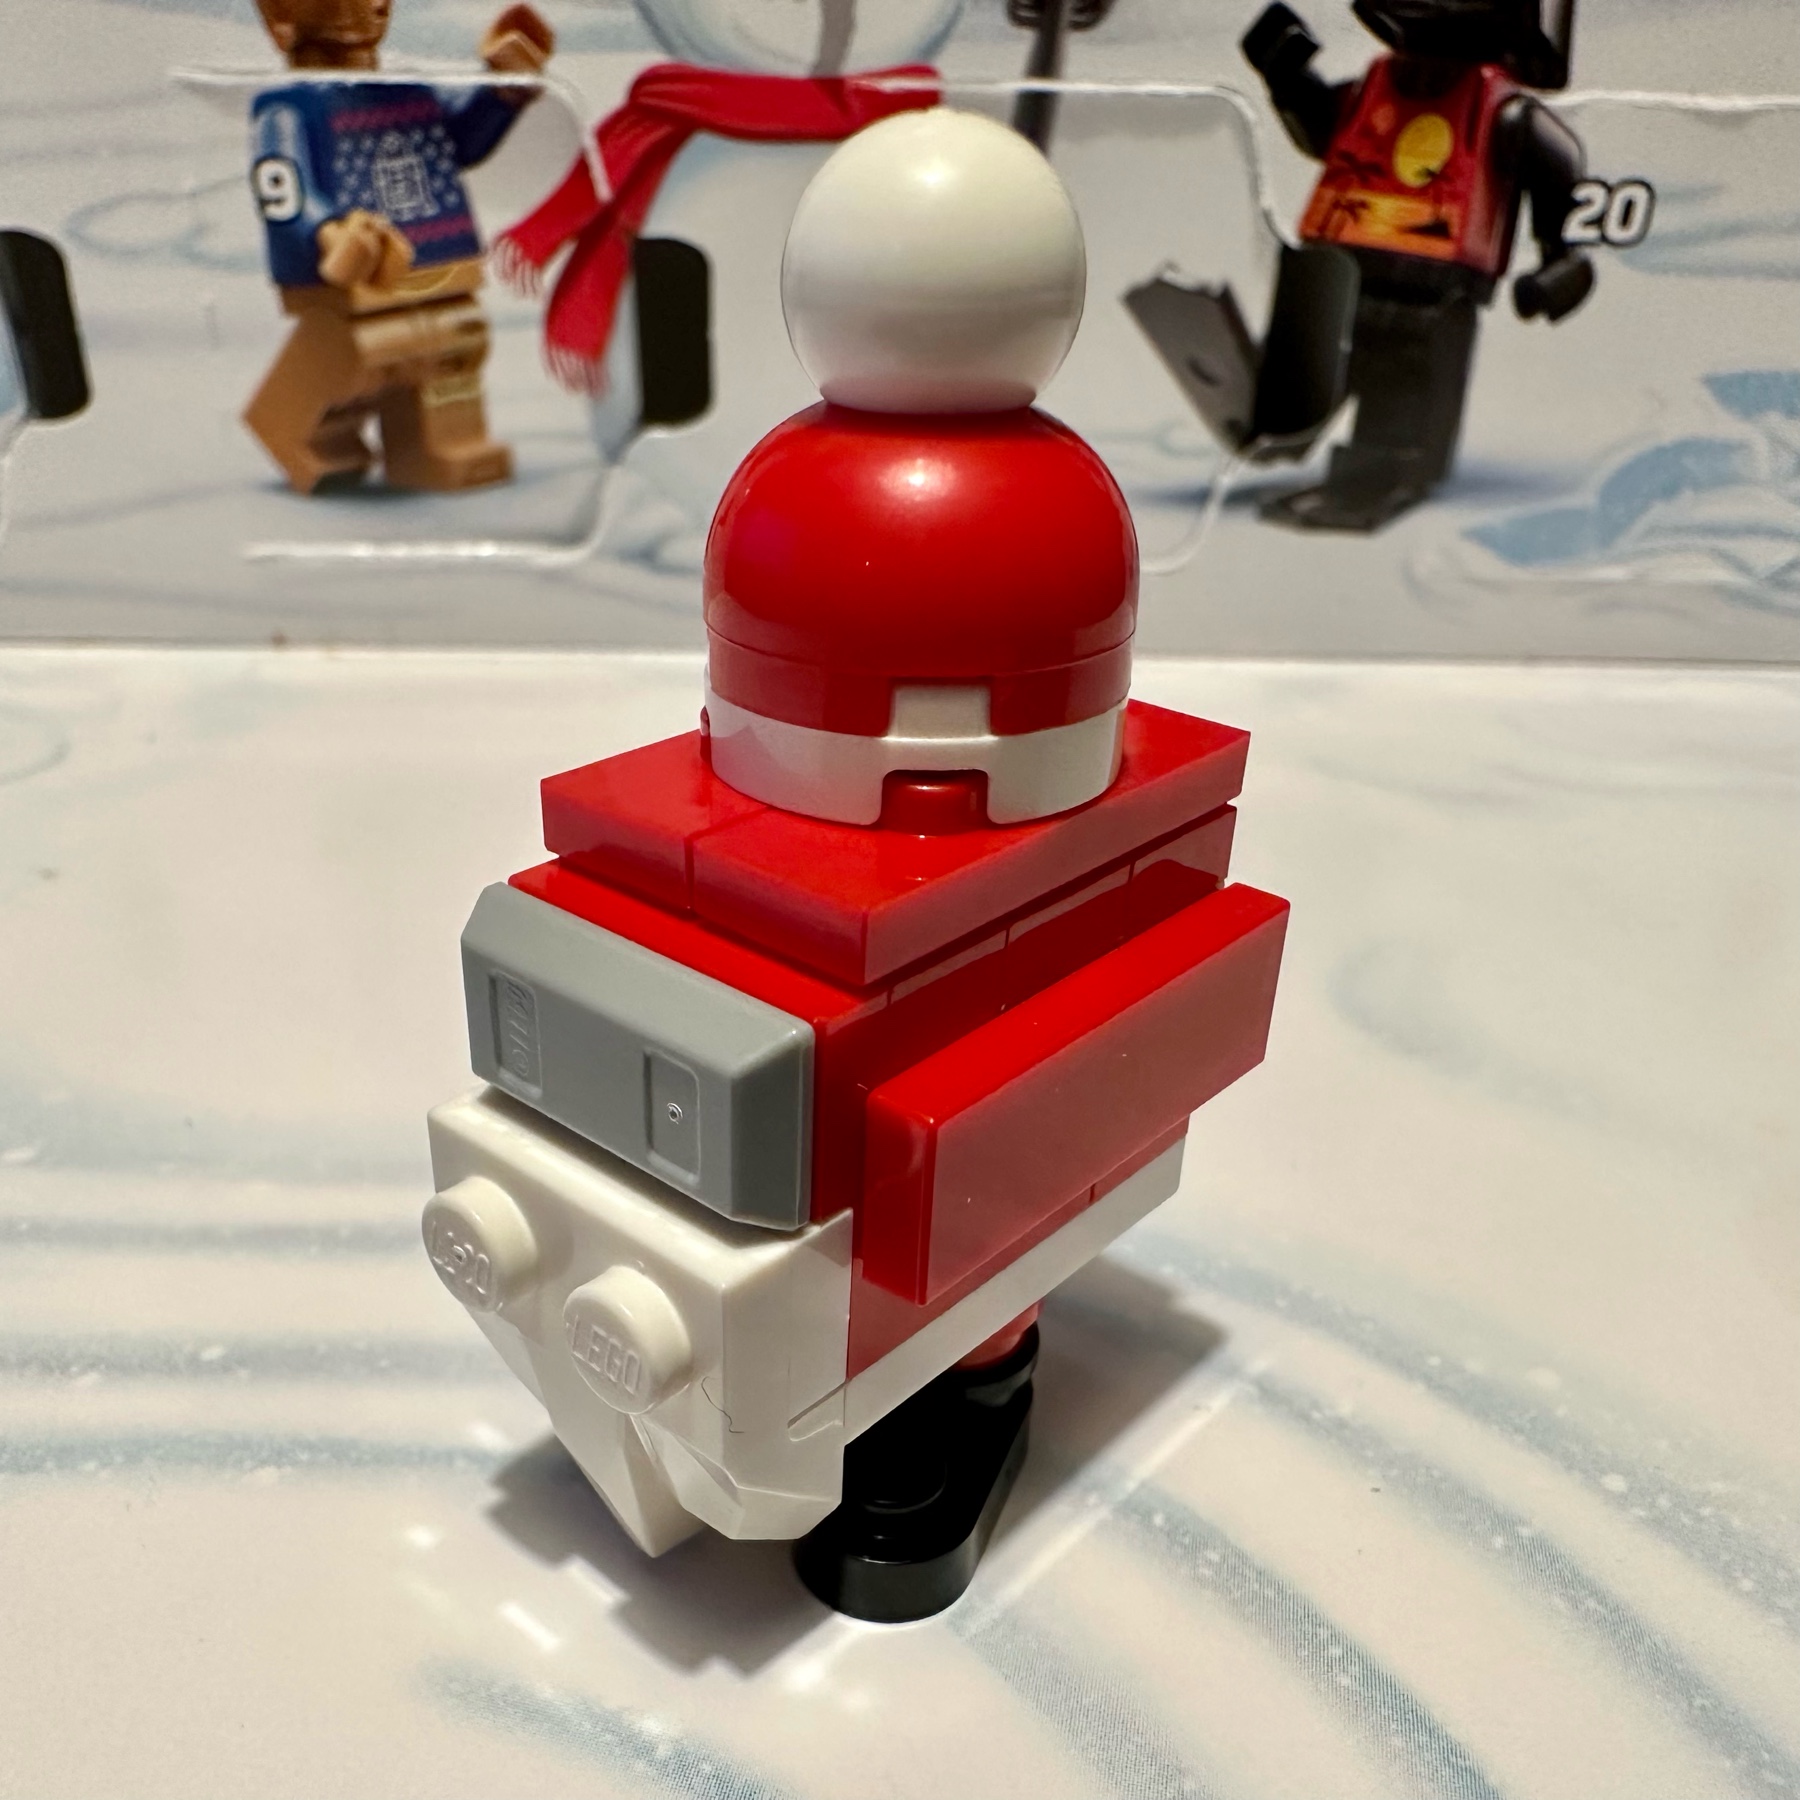 LEGO gonk droid in red and white with a Santa hat, white beard, and black boots